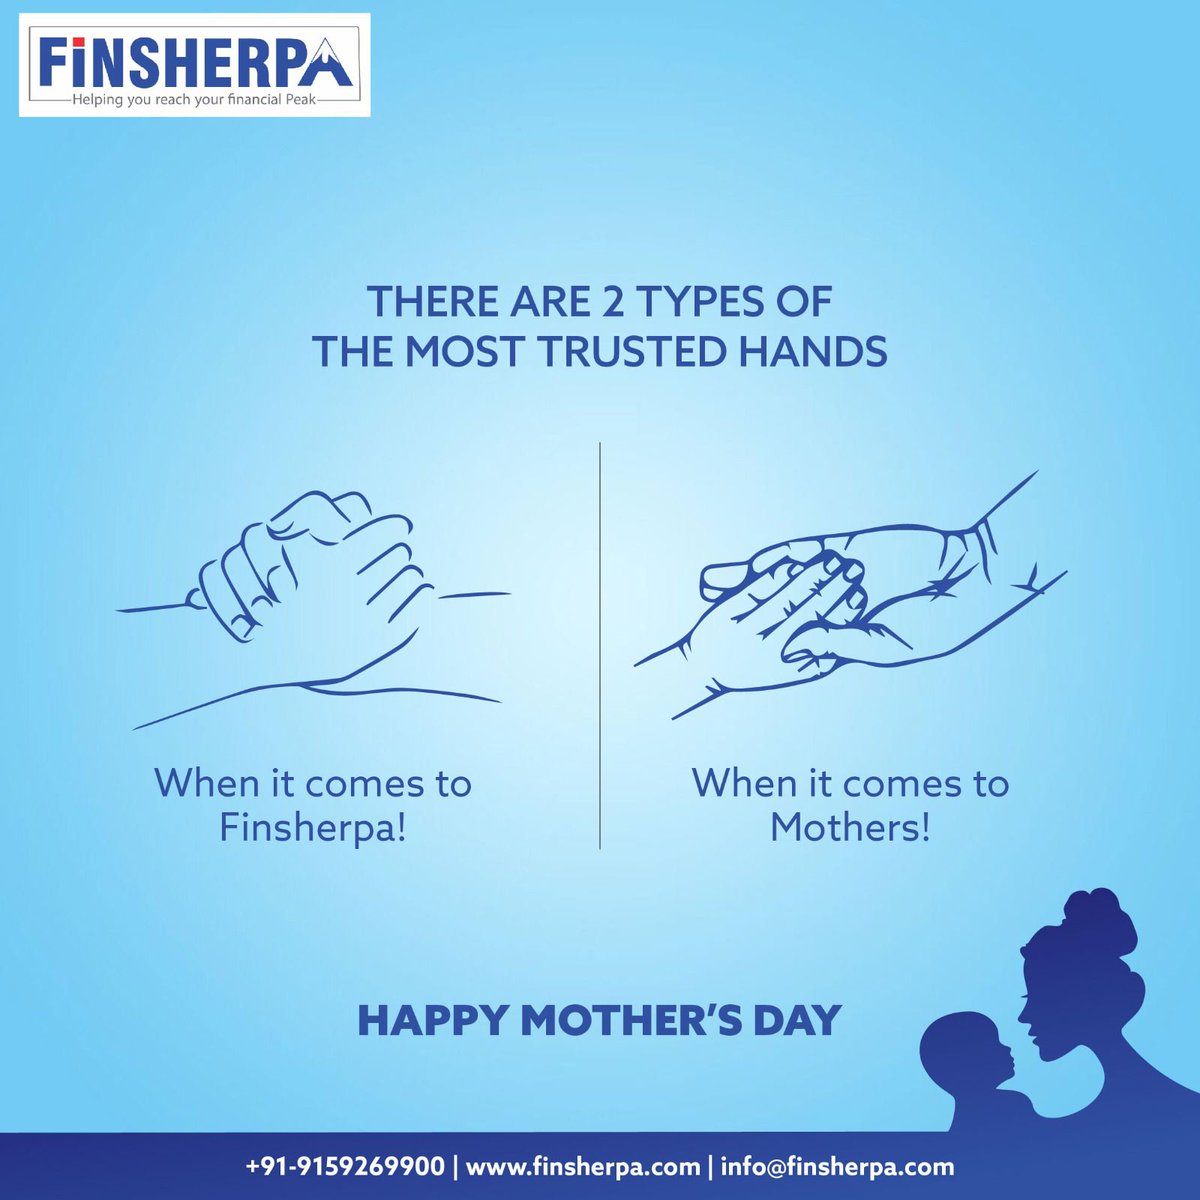 Your mother's guidance is your first beacon of trust, and when it comes to navigating the financial landscape, FinSherpa stands as your next trusted partner.

Happy Mother’s Day!